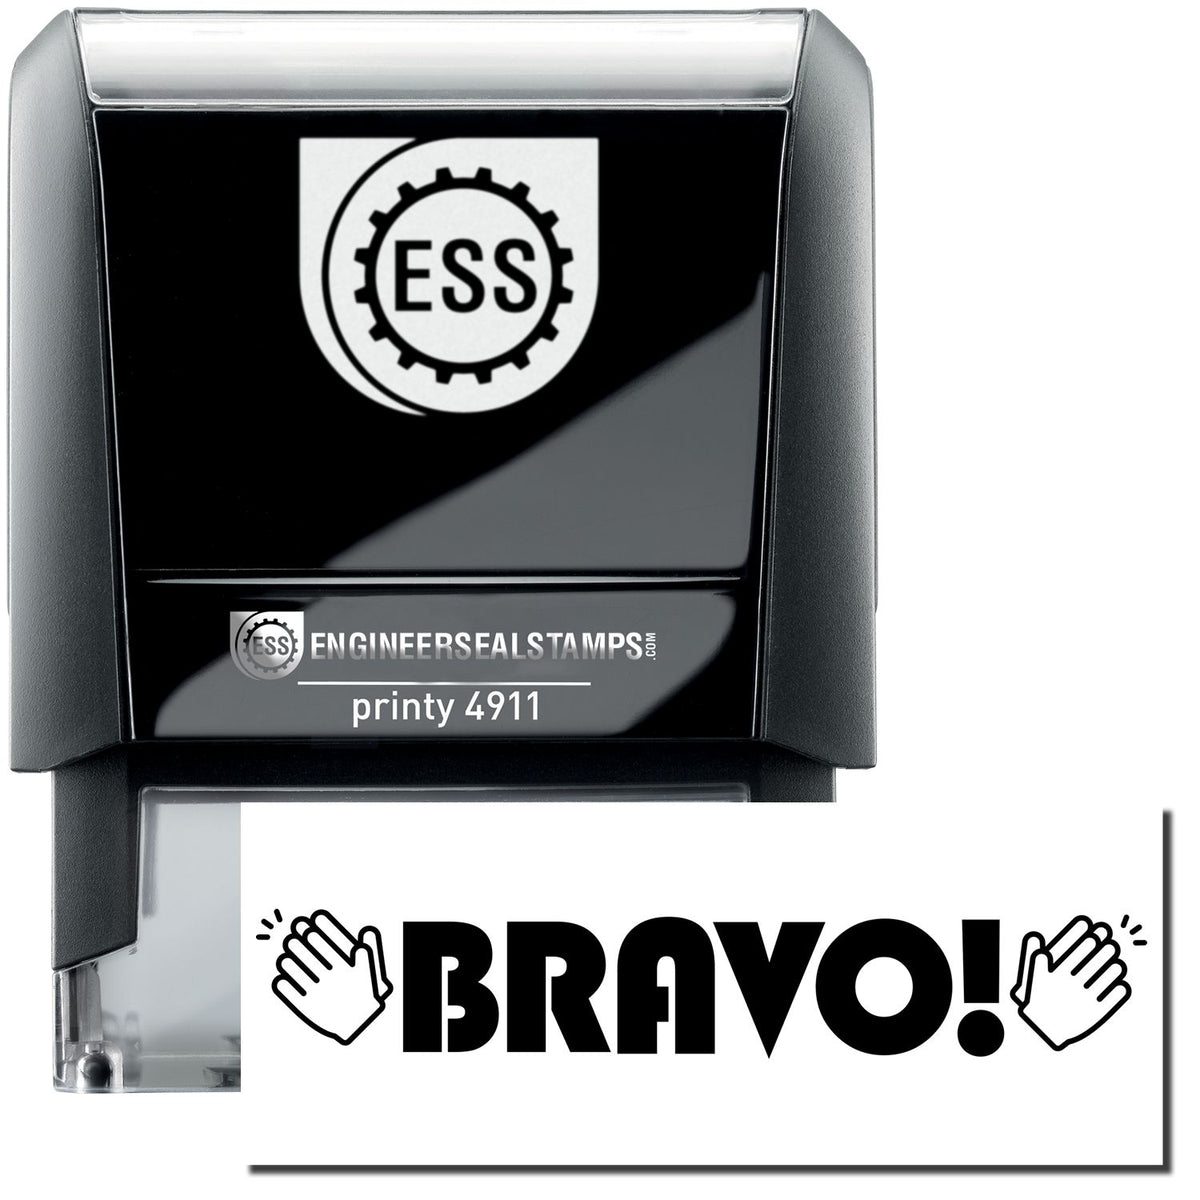 A self-inking stamp with a stamped image showing how the text &quot;BRAVO!&quot; (with clapping hands on either side of the text) is displayed after stamping.